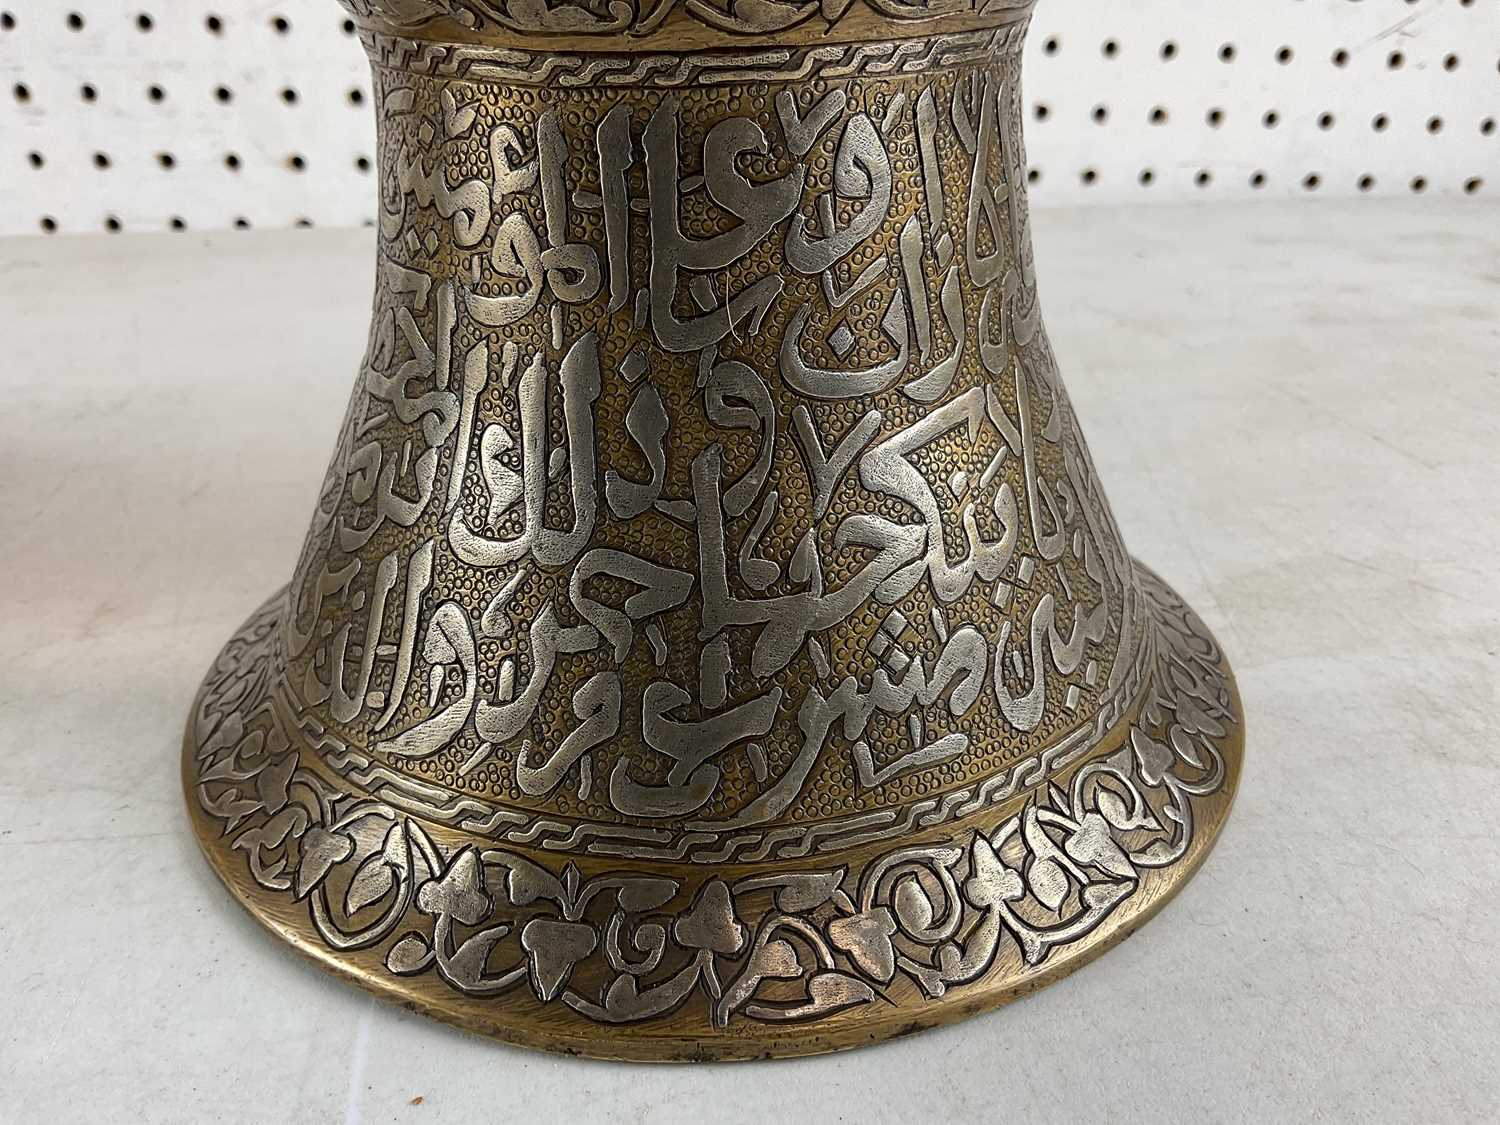 A pair of Islamic brass and silver inlaid candlesticks with Arabic calligraphy, height 30cm. - Image 2 of 3